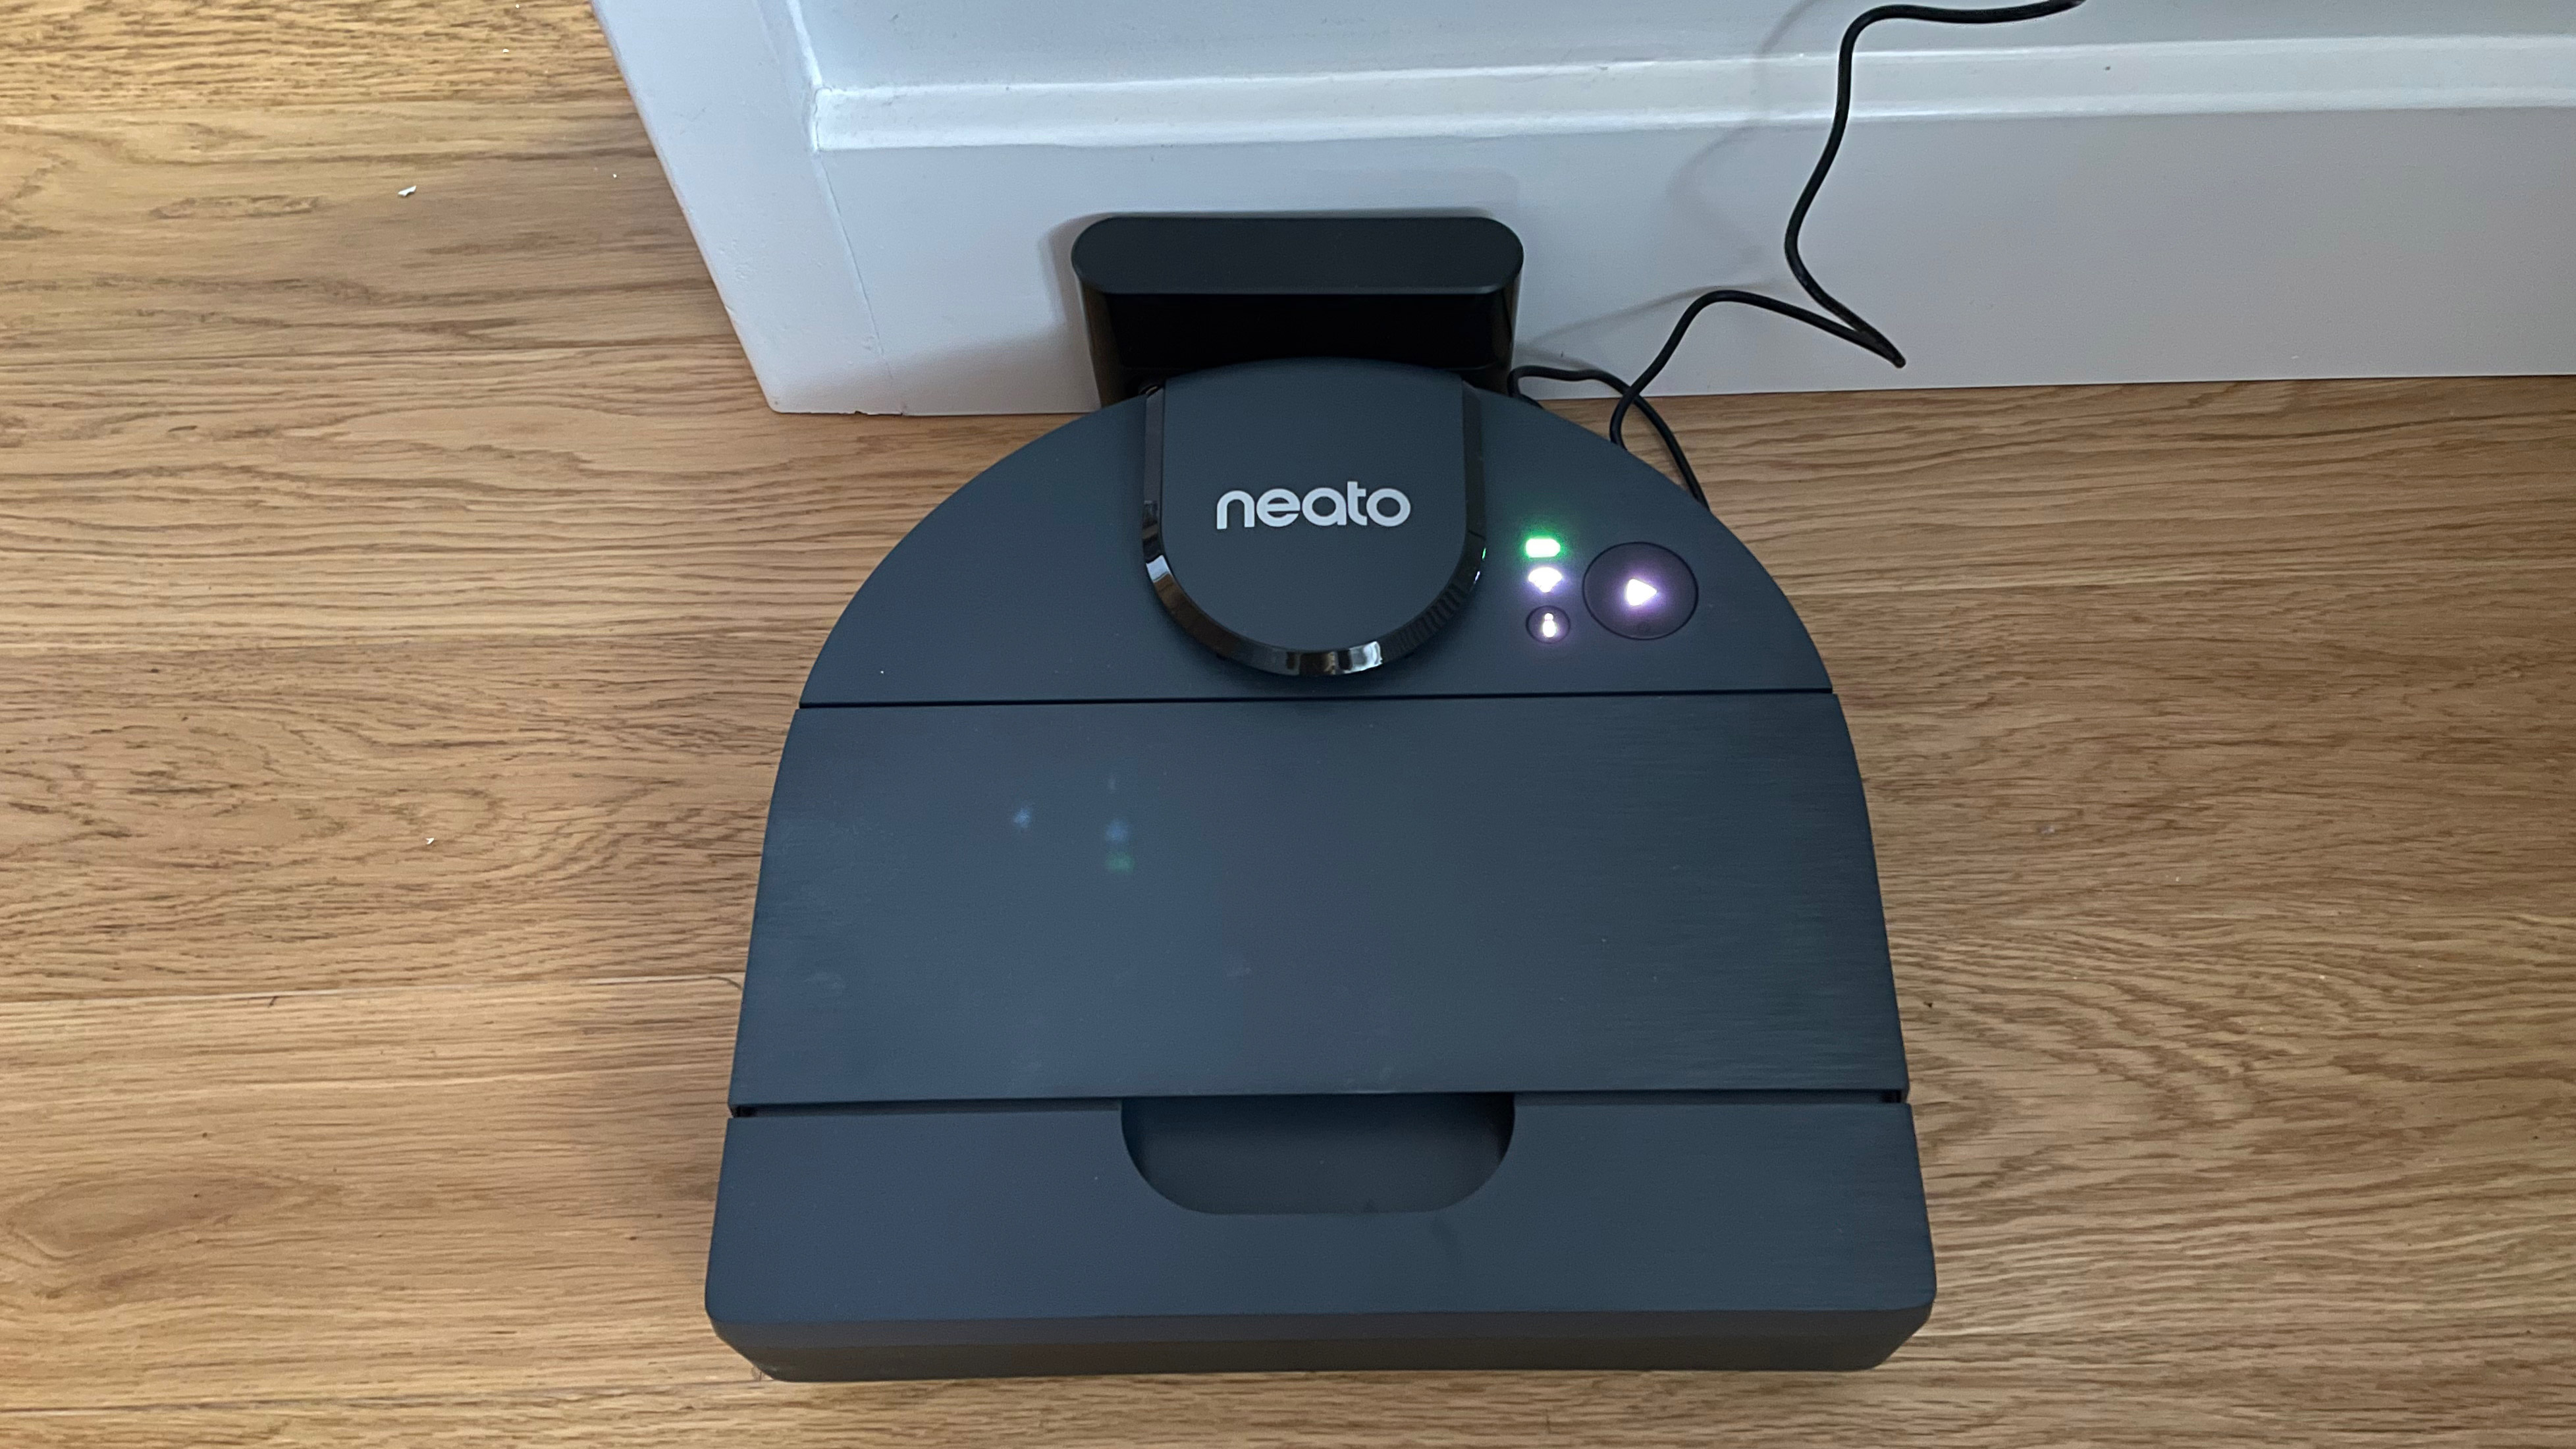 The Neato D8 on charge